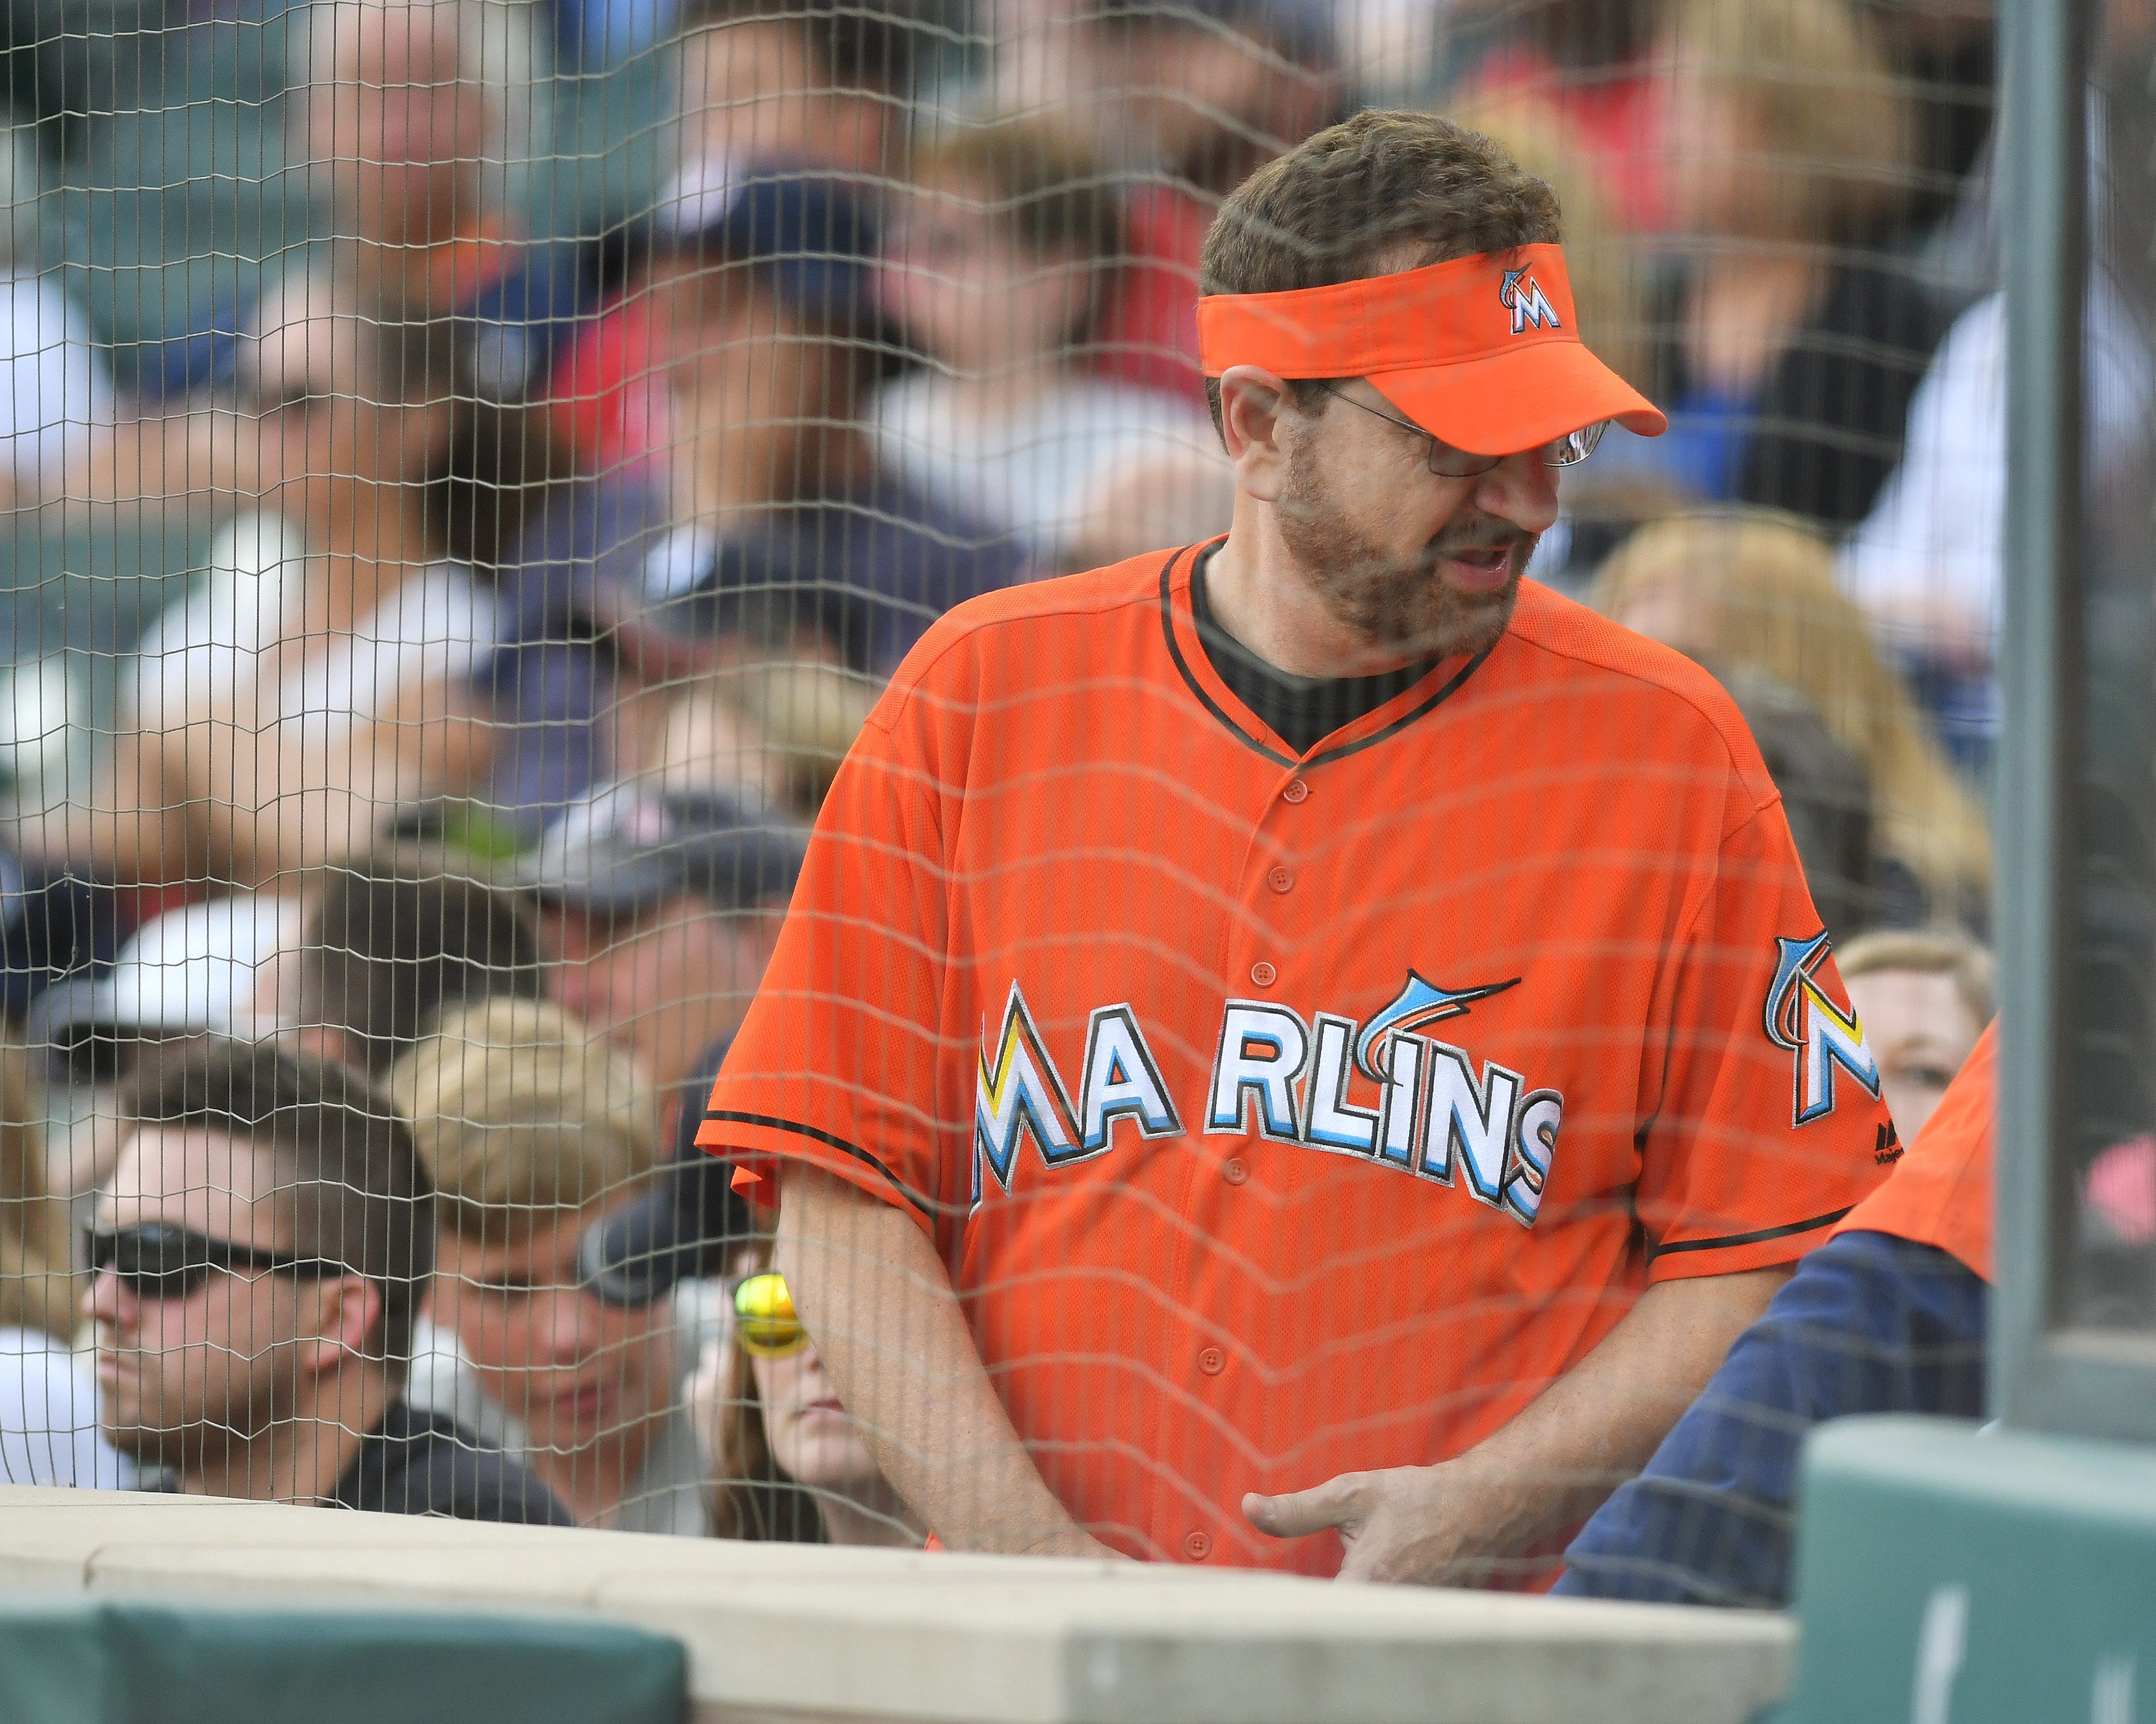 who is the guy with the marlins jersey